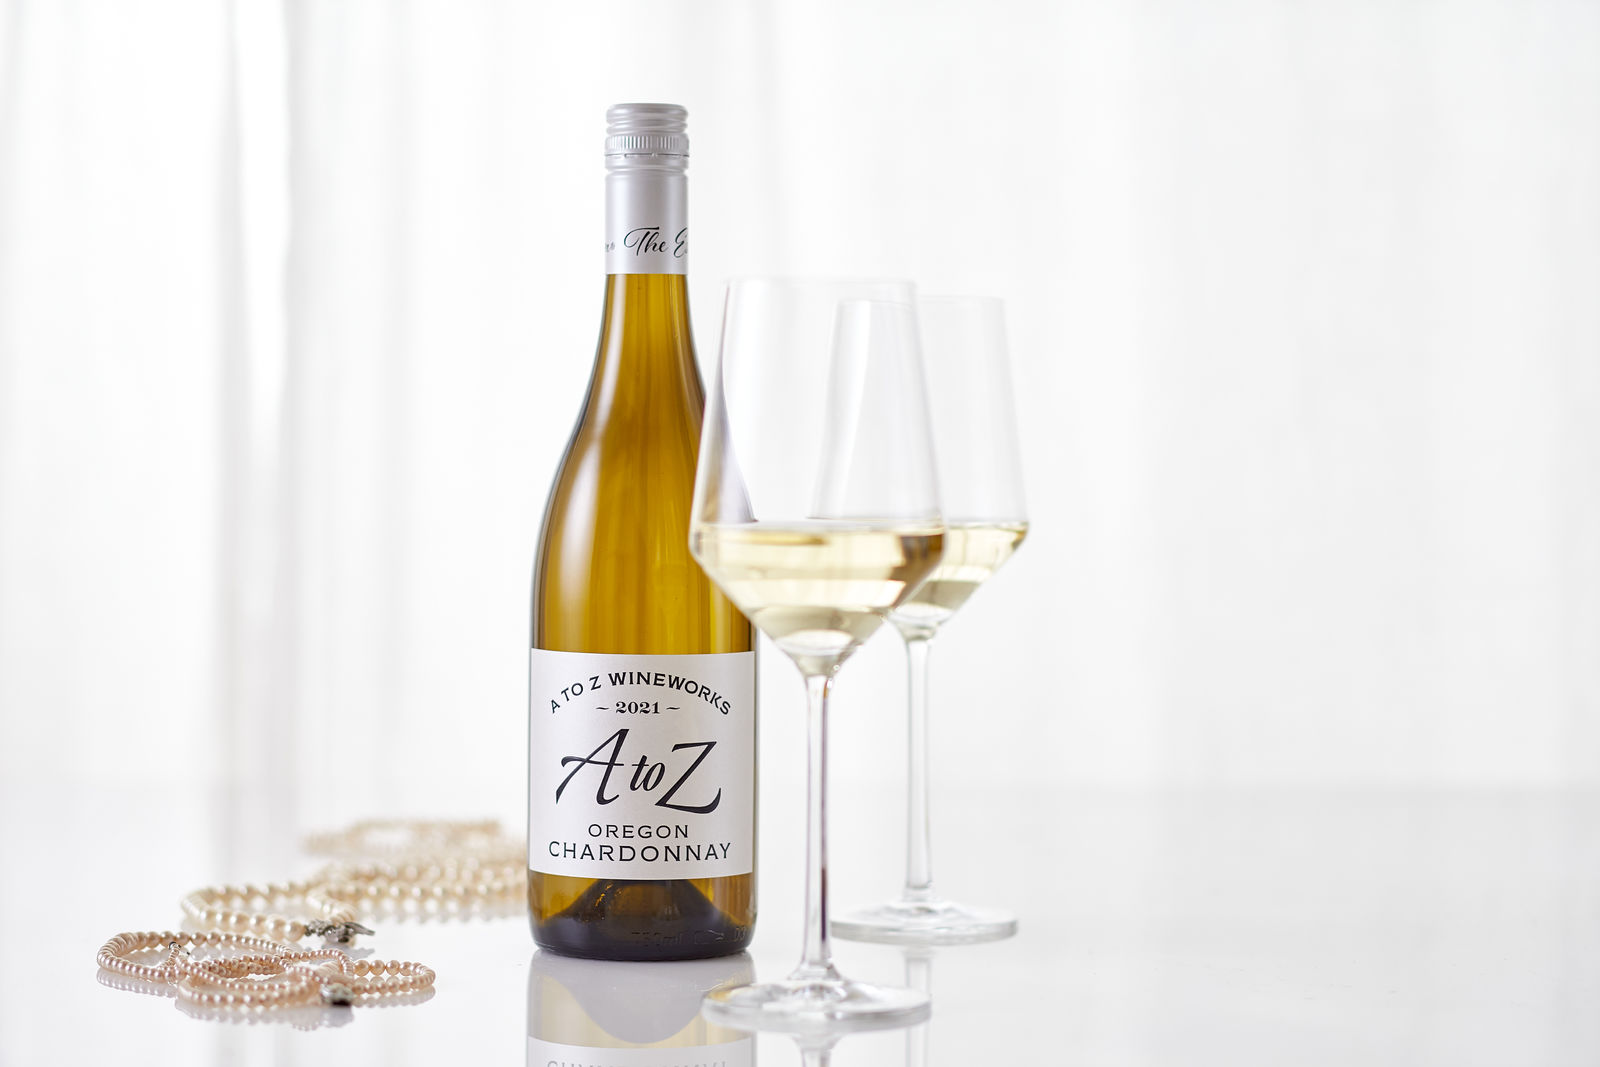 All About A to Z Chardonnay